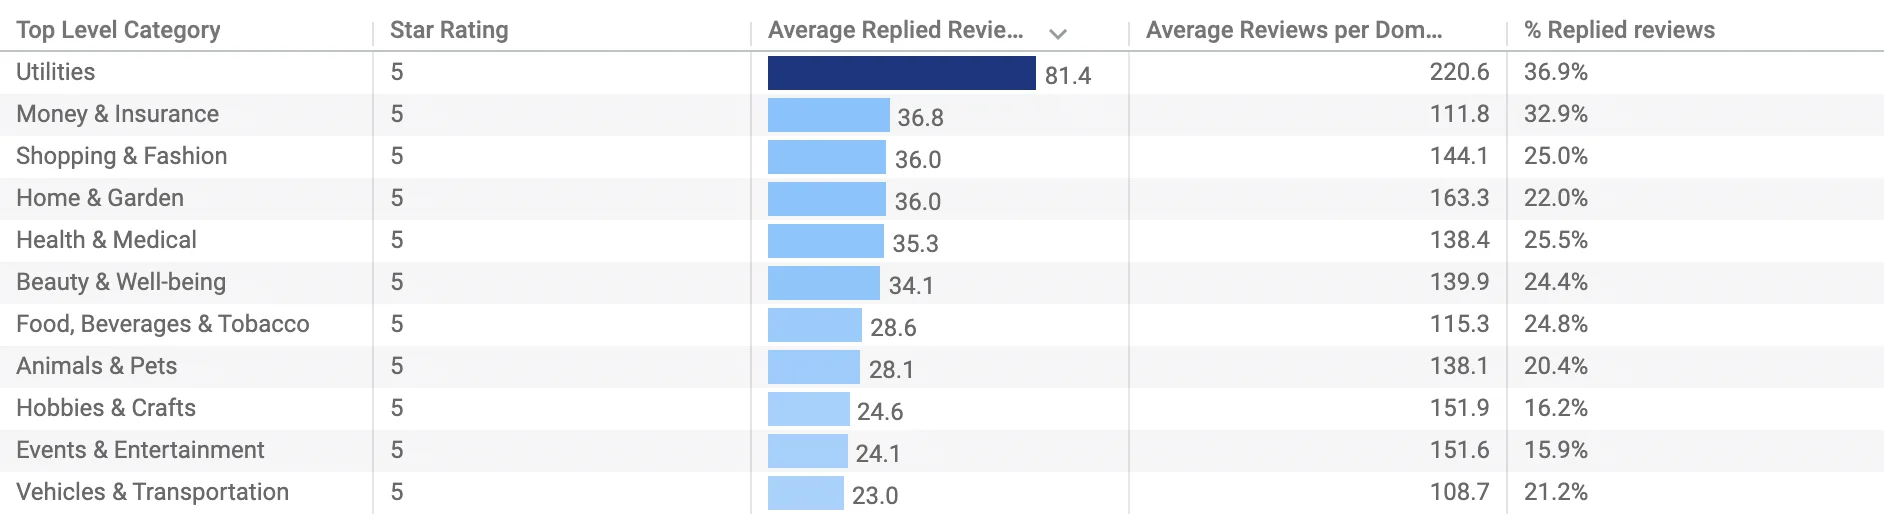 6 TrustScore vs Number of responses to reviews